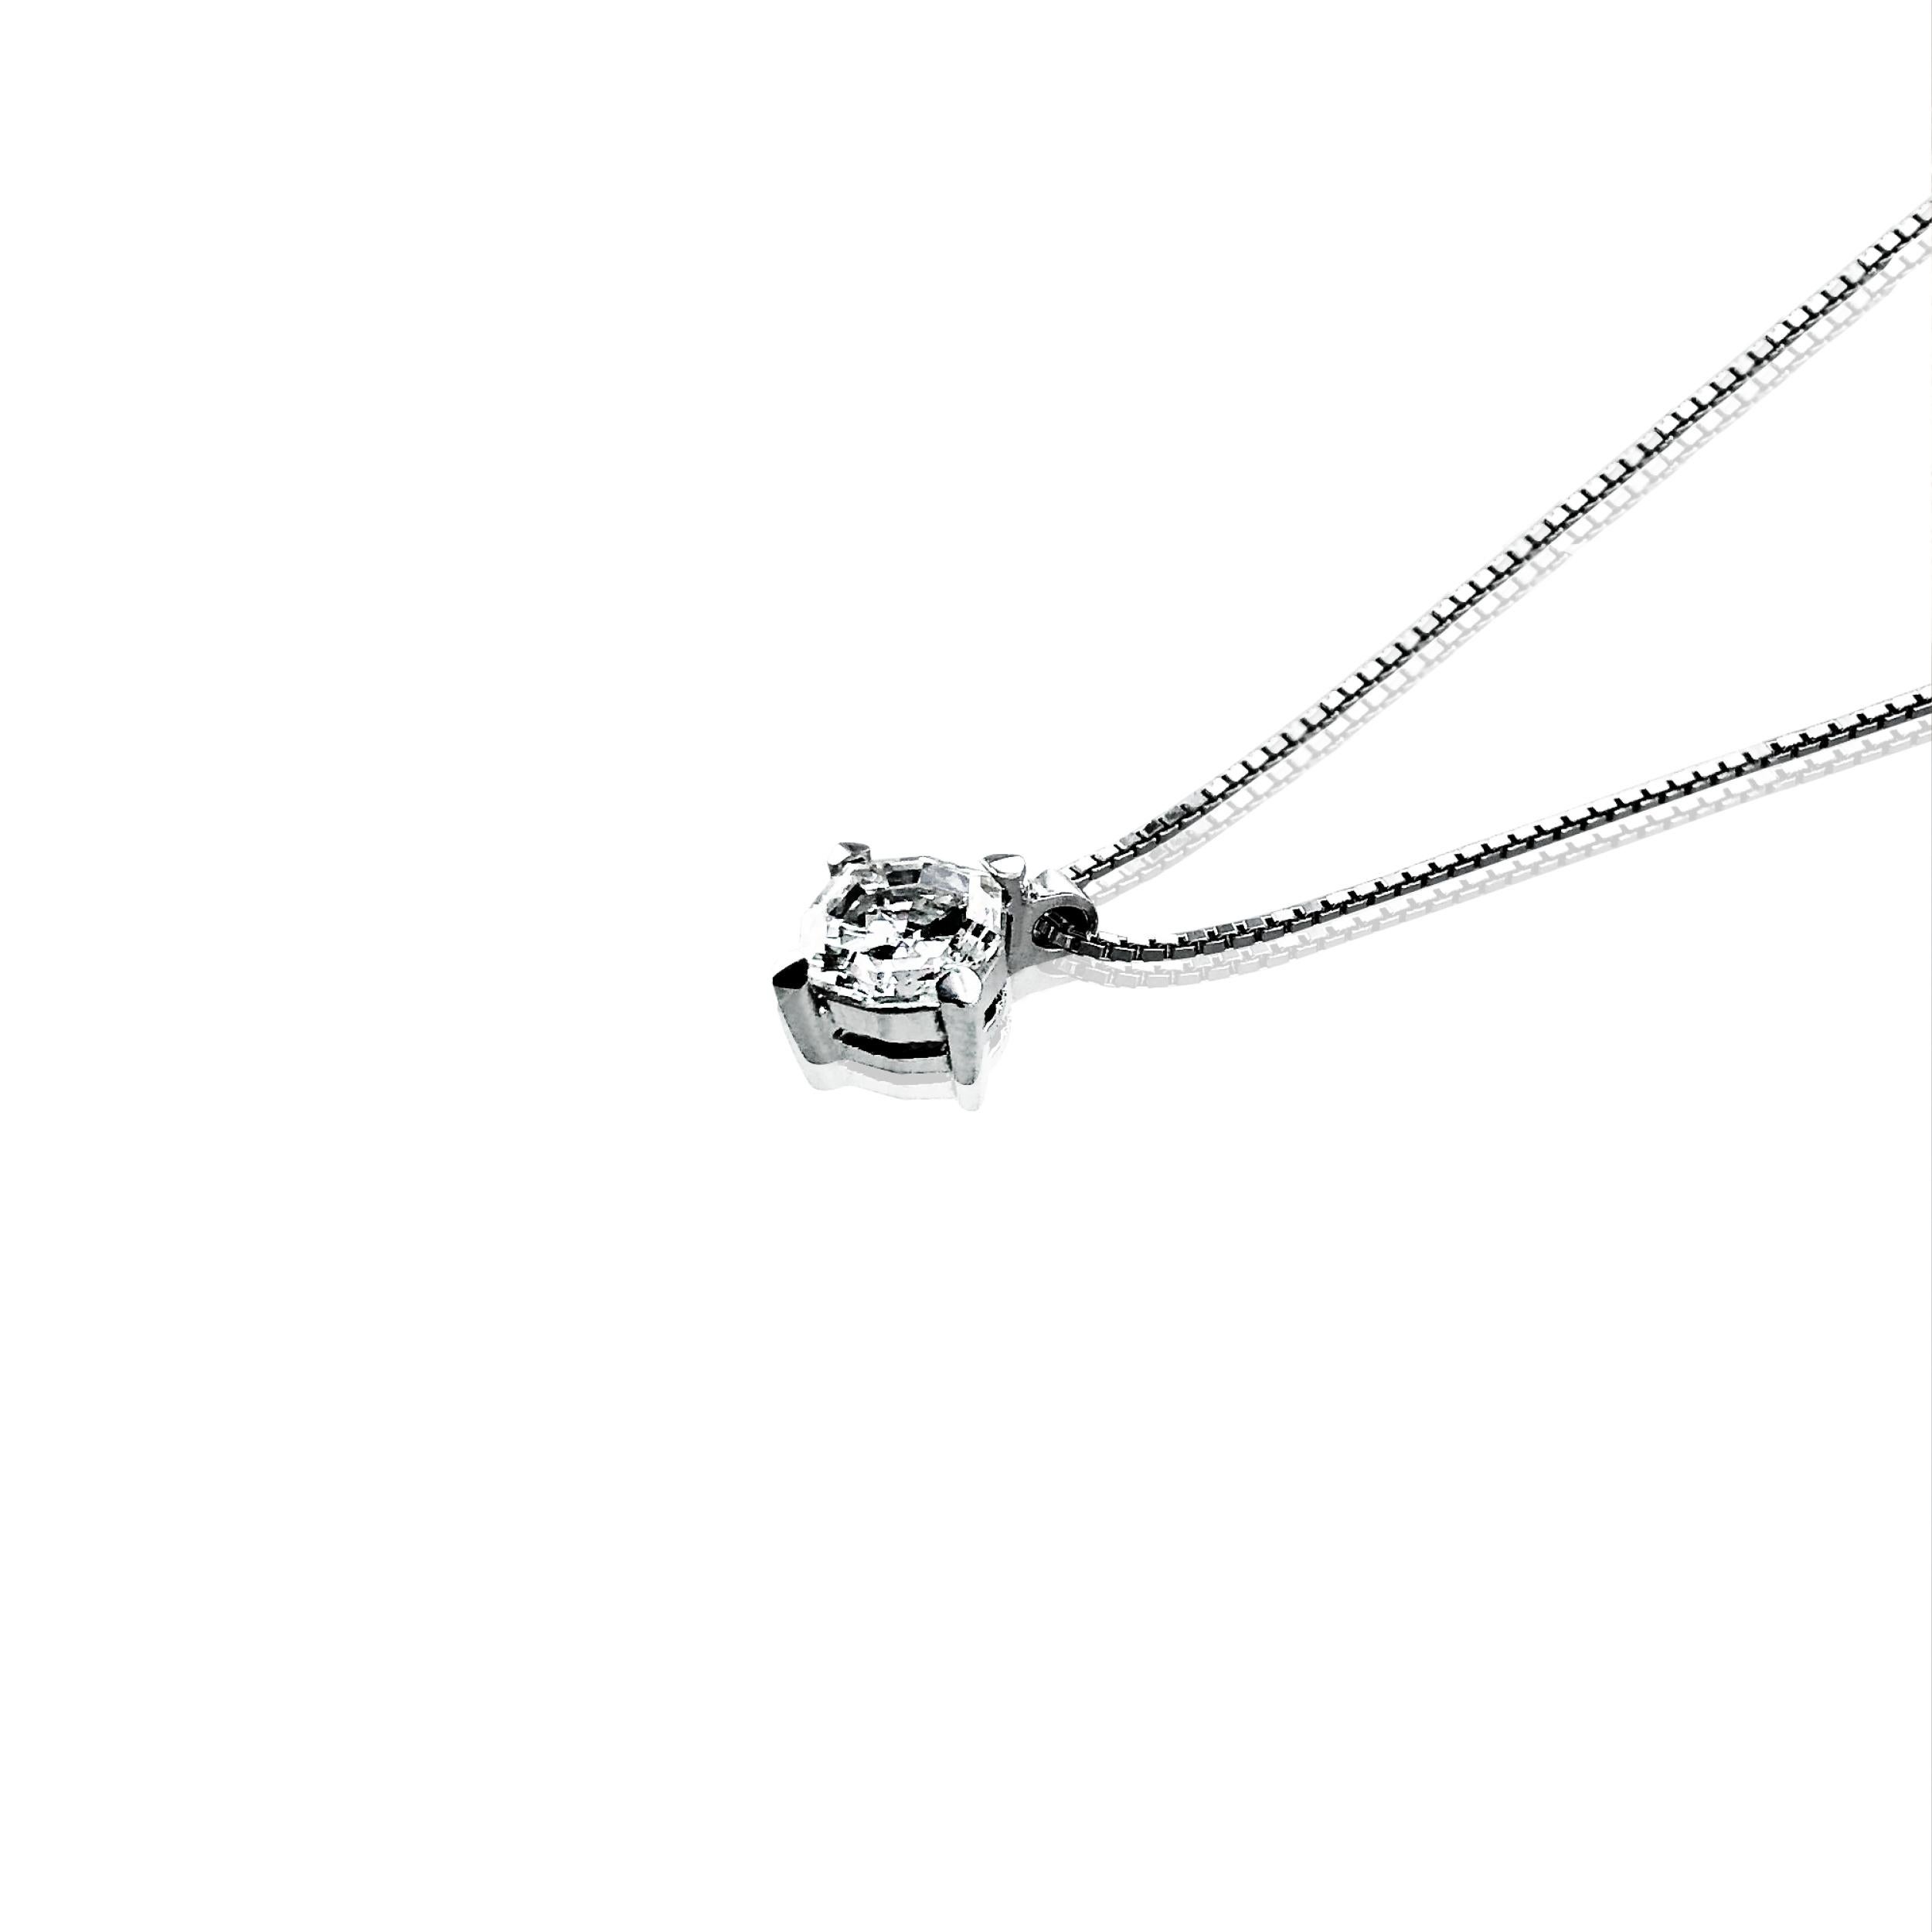 This 0.63 Carat round Diamond pendant necklace is simple, timelessly elegant and wearable all day every day with any outfit. 

Set in an 18Kt white Gold chain with a lobster claw closure, it hangs down the neckline at 20 cm.

A must have in